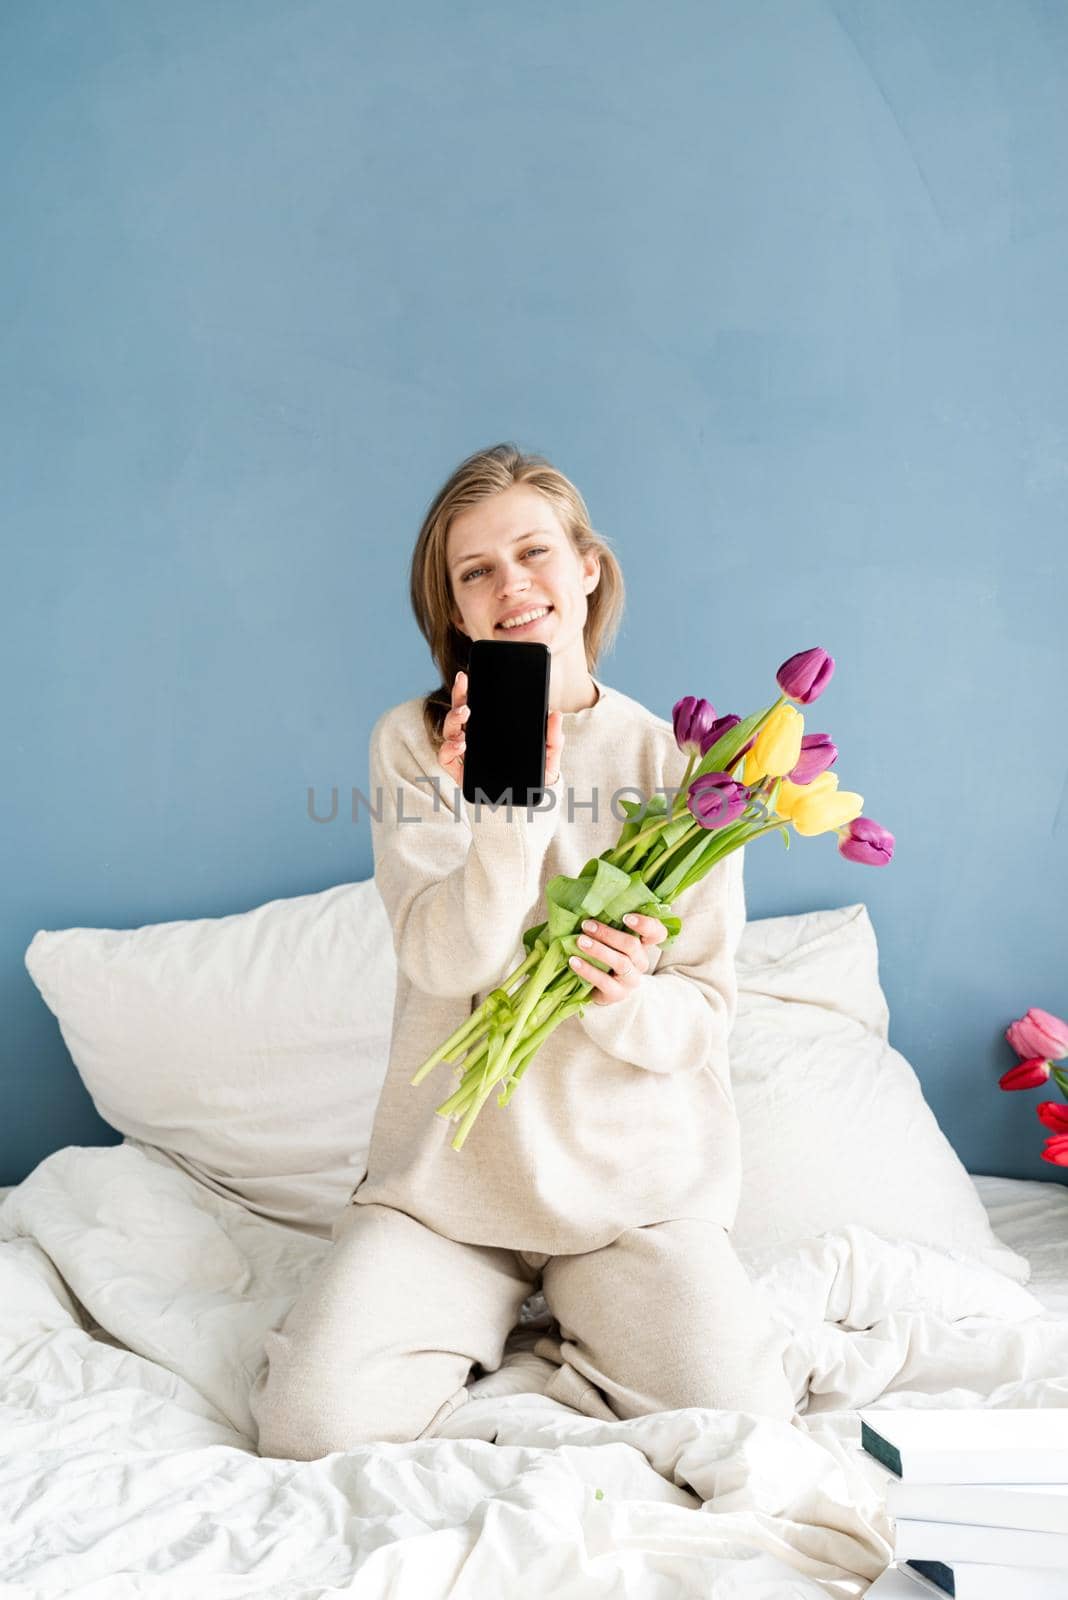 Happy woman sitting on the bed wearing pajamas holding tulip flowers and showing smartphone screen, mock up design